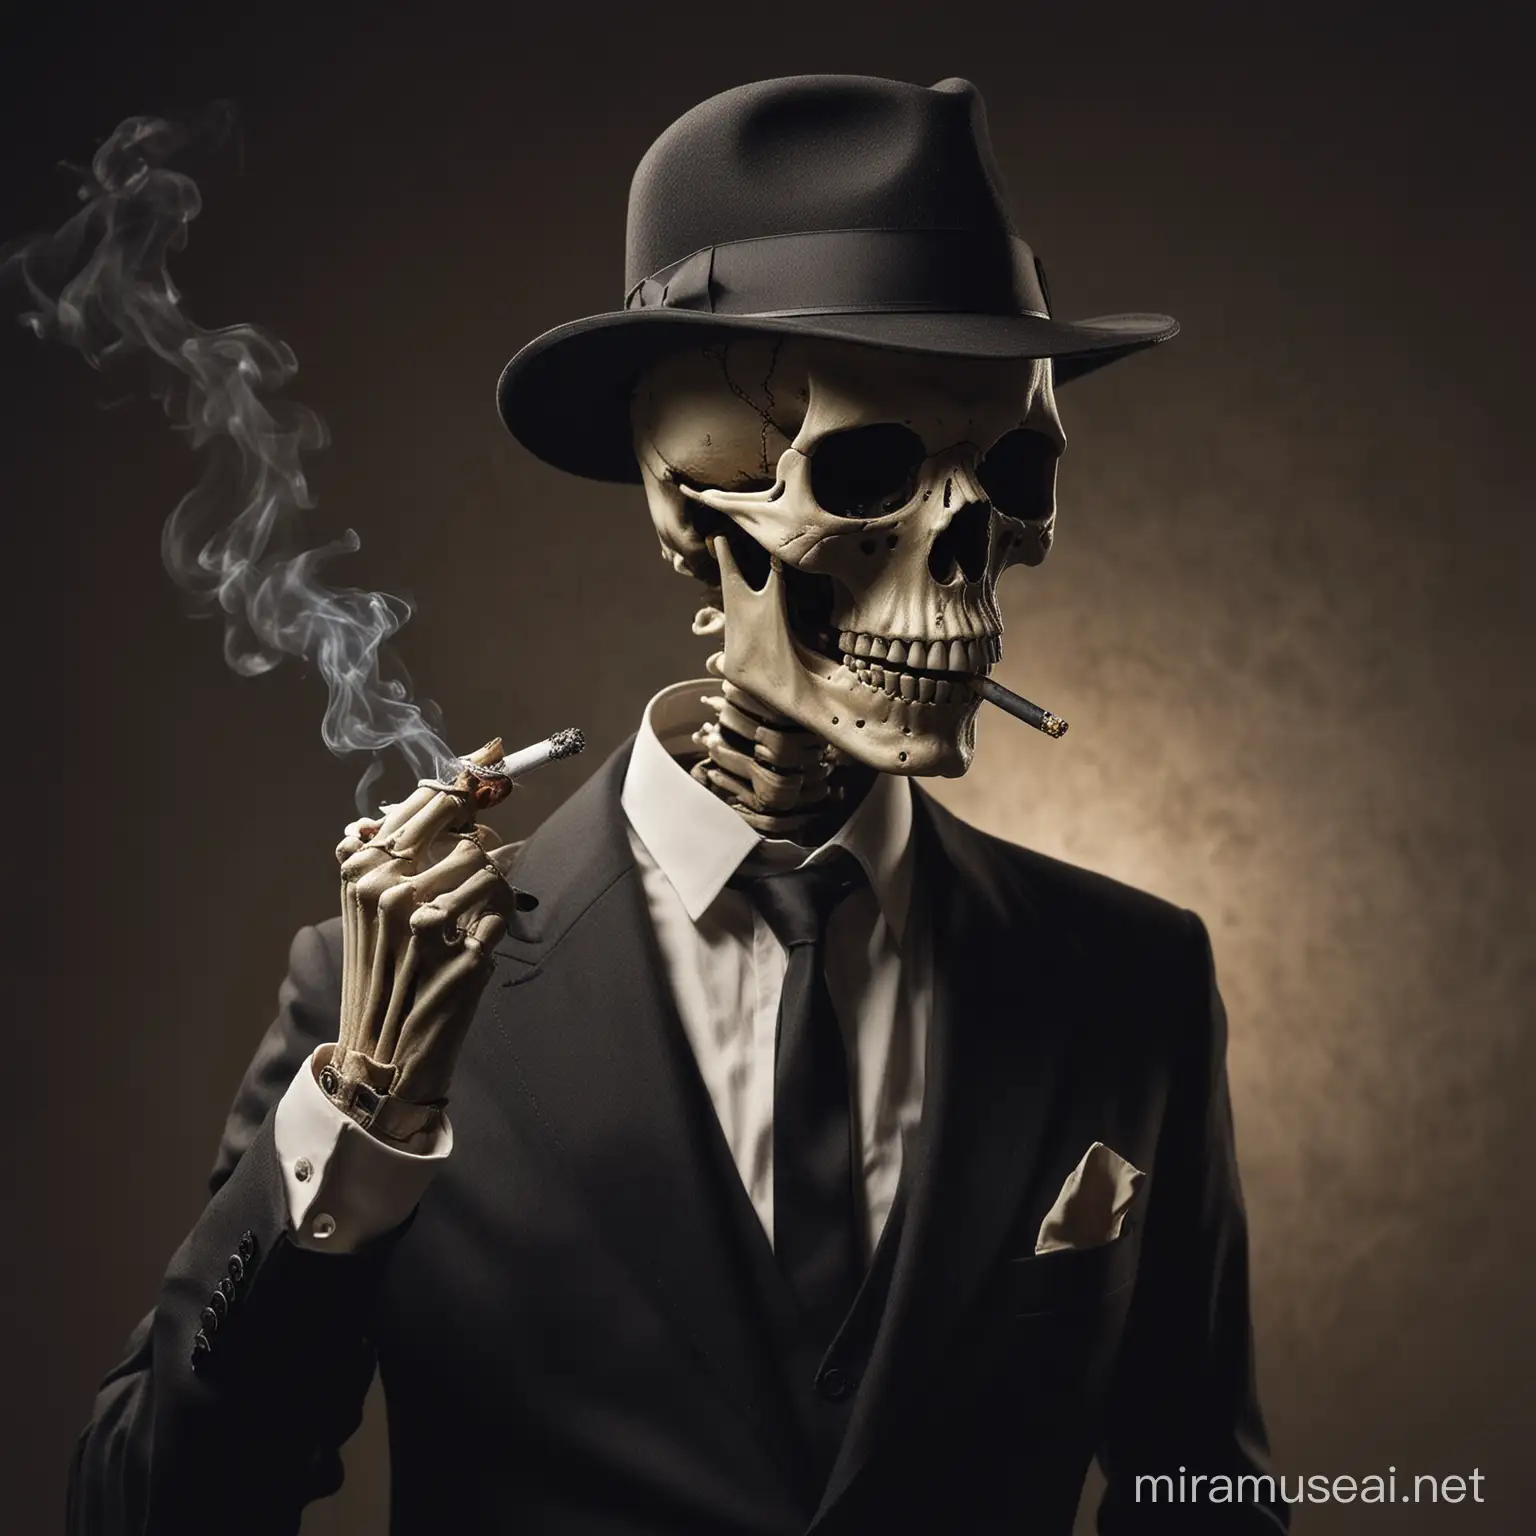 Skeleton in a suit and fedora lighting  a cigarette